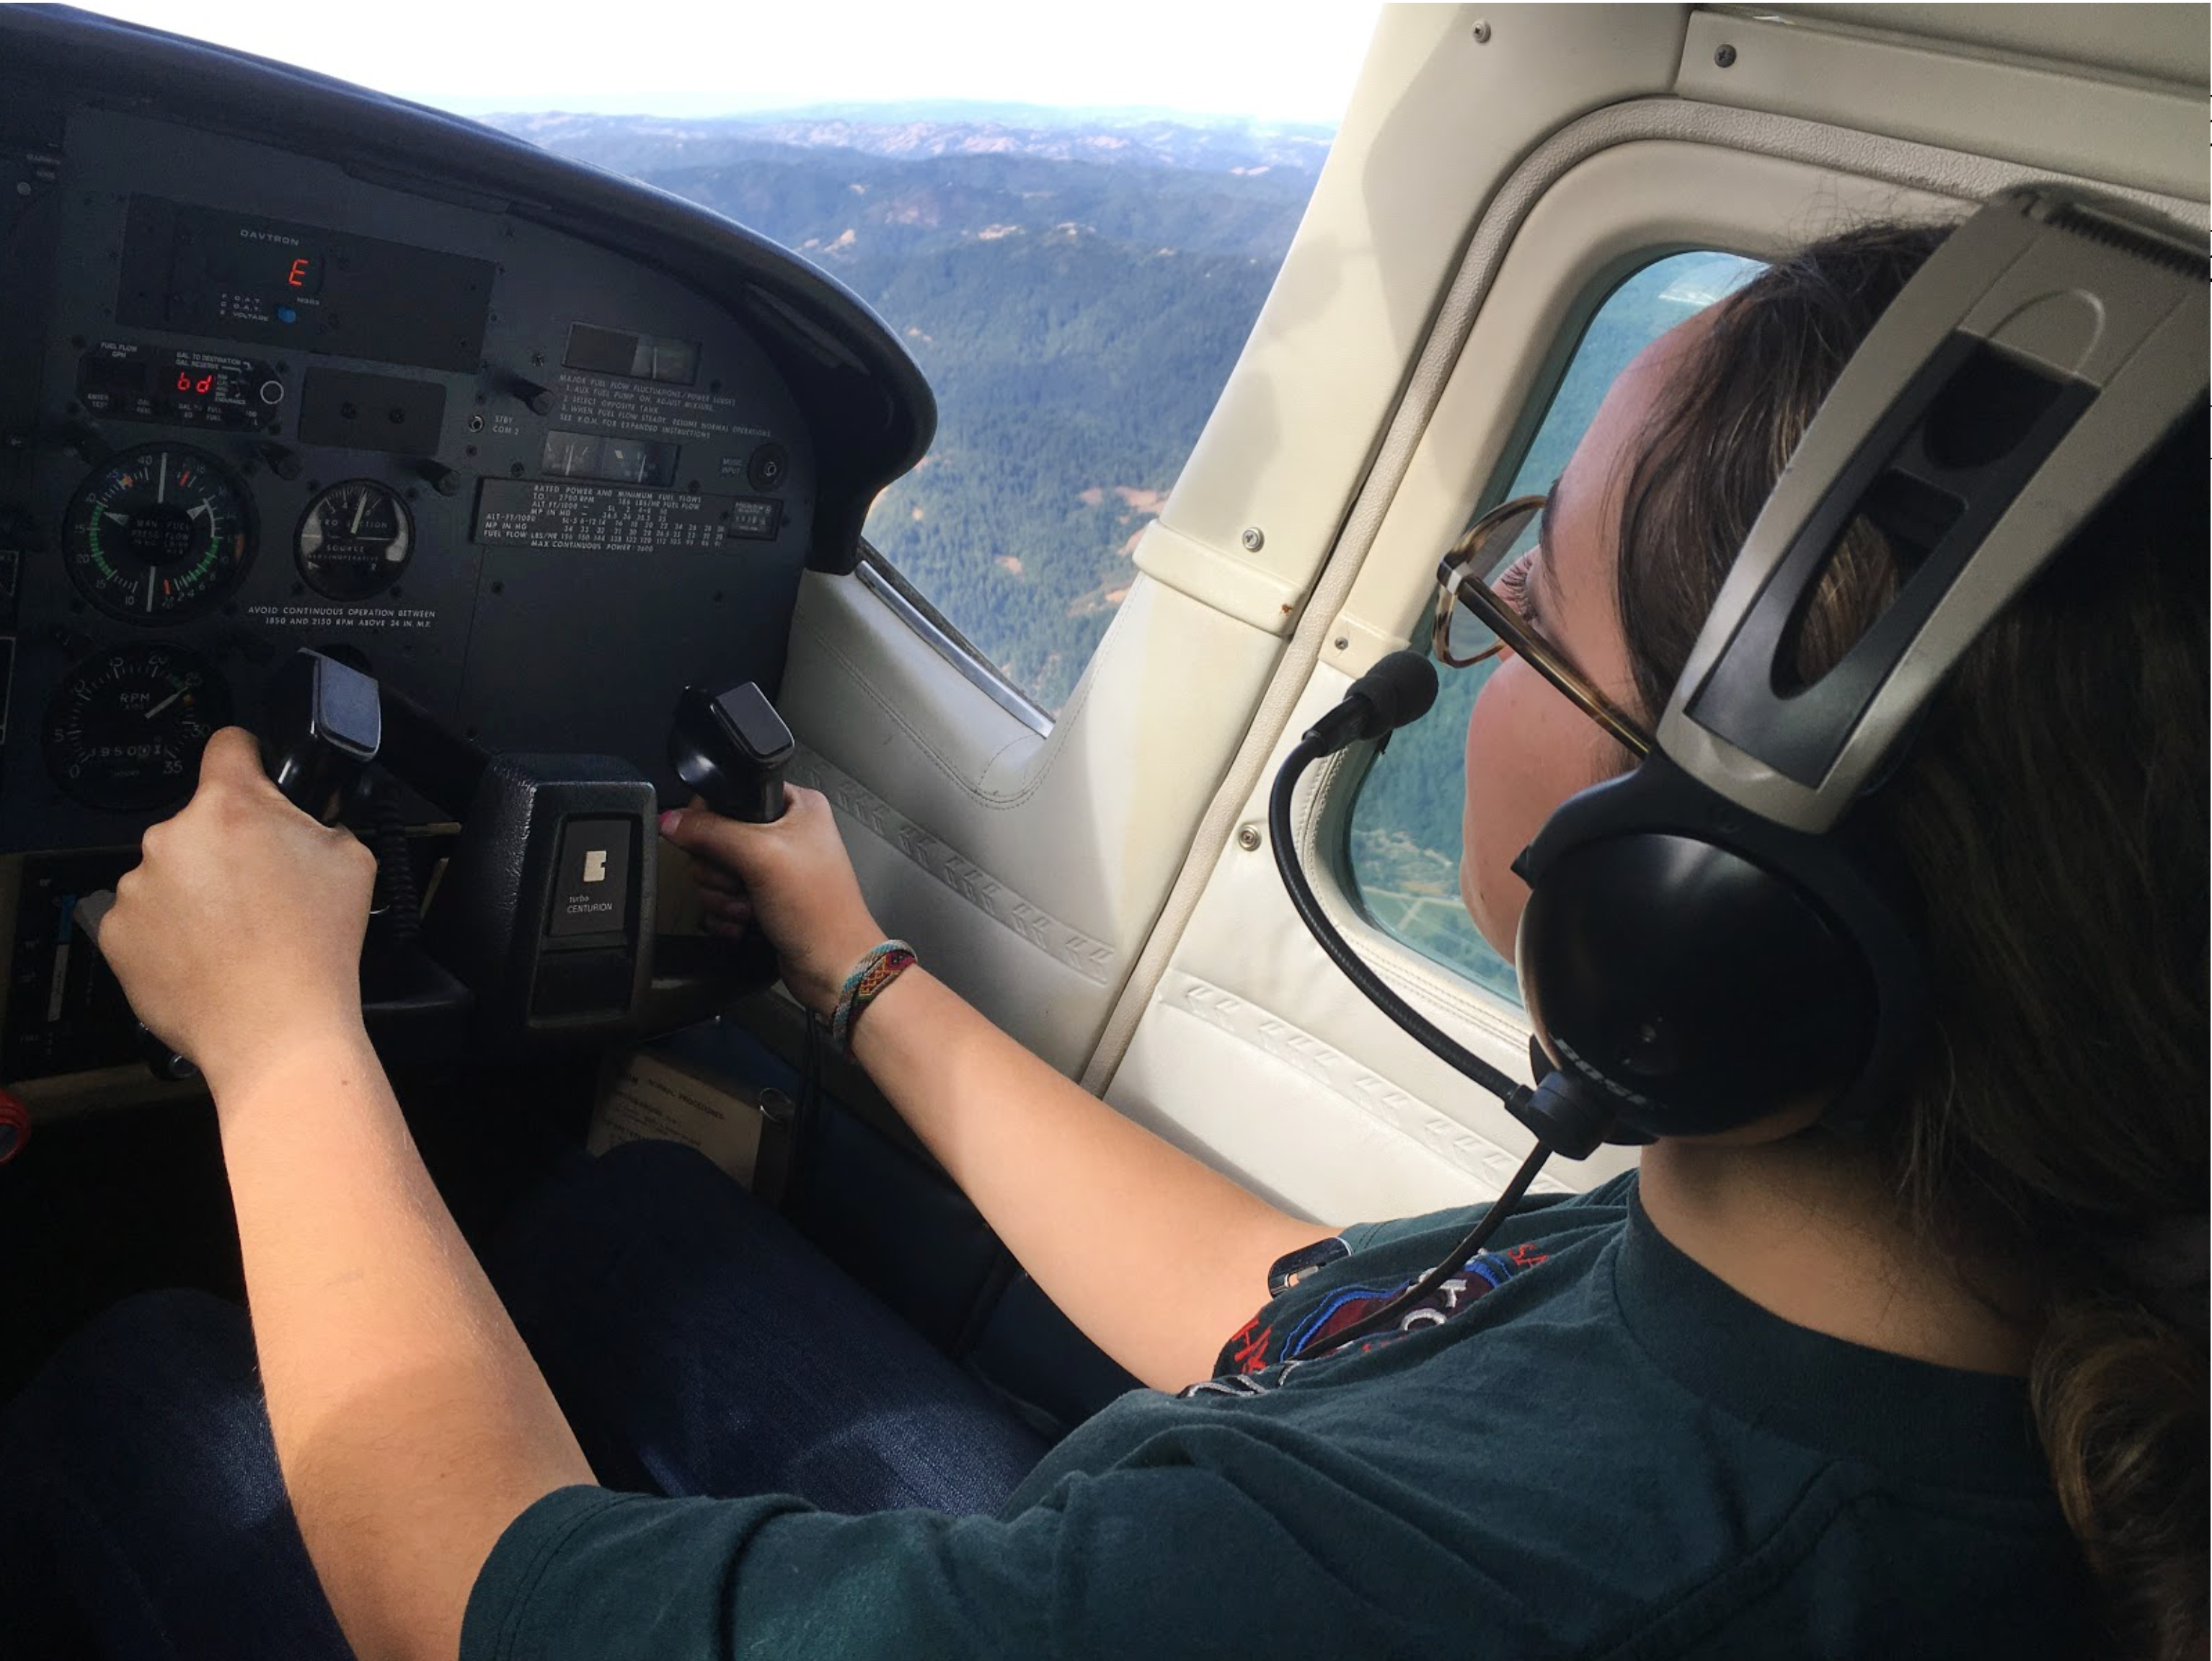 A student in the cockpit of a plane during an internship, with the Sonoma landscape visible through the window.